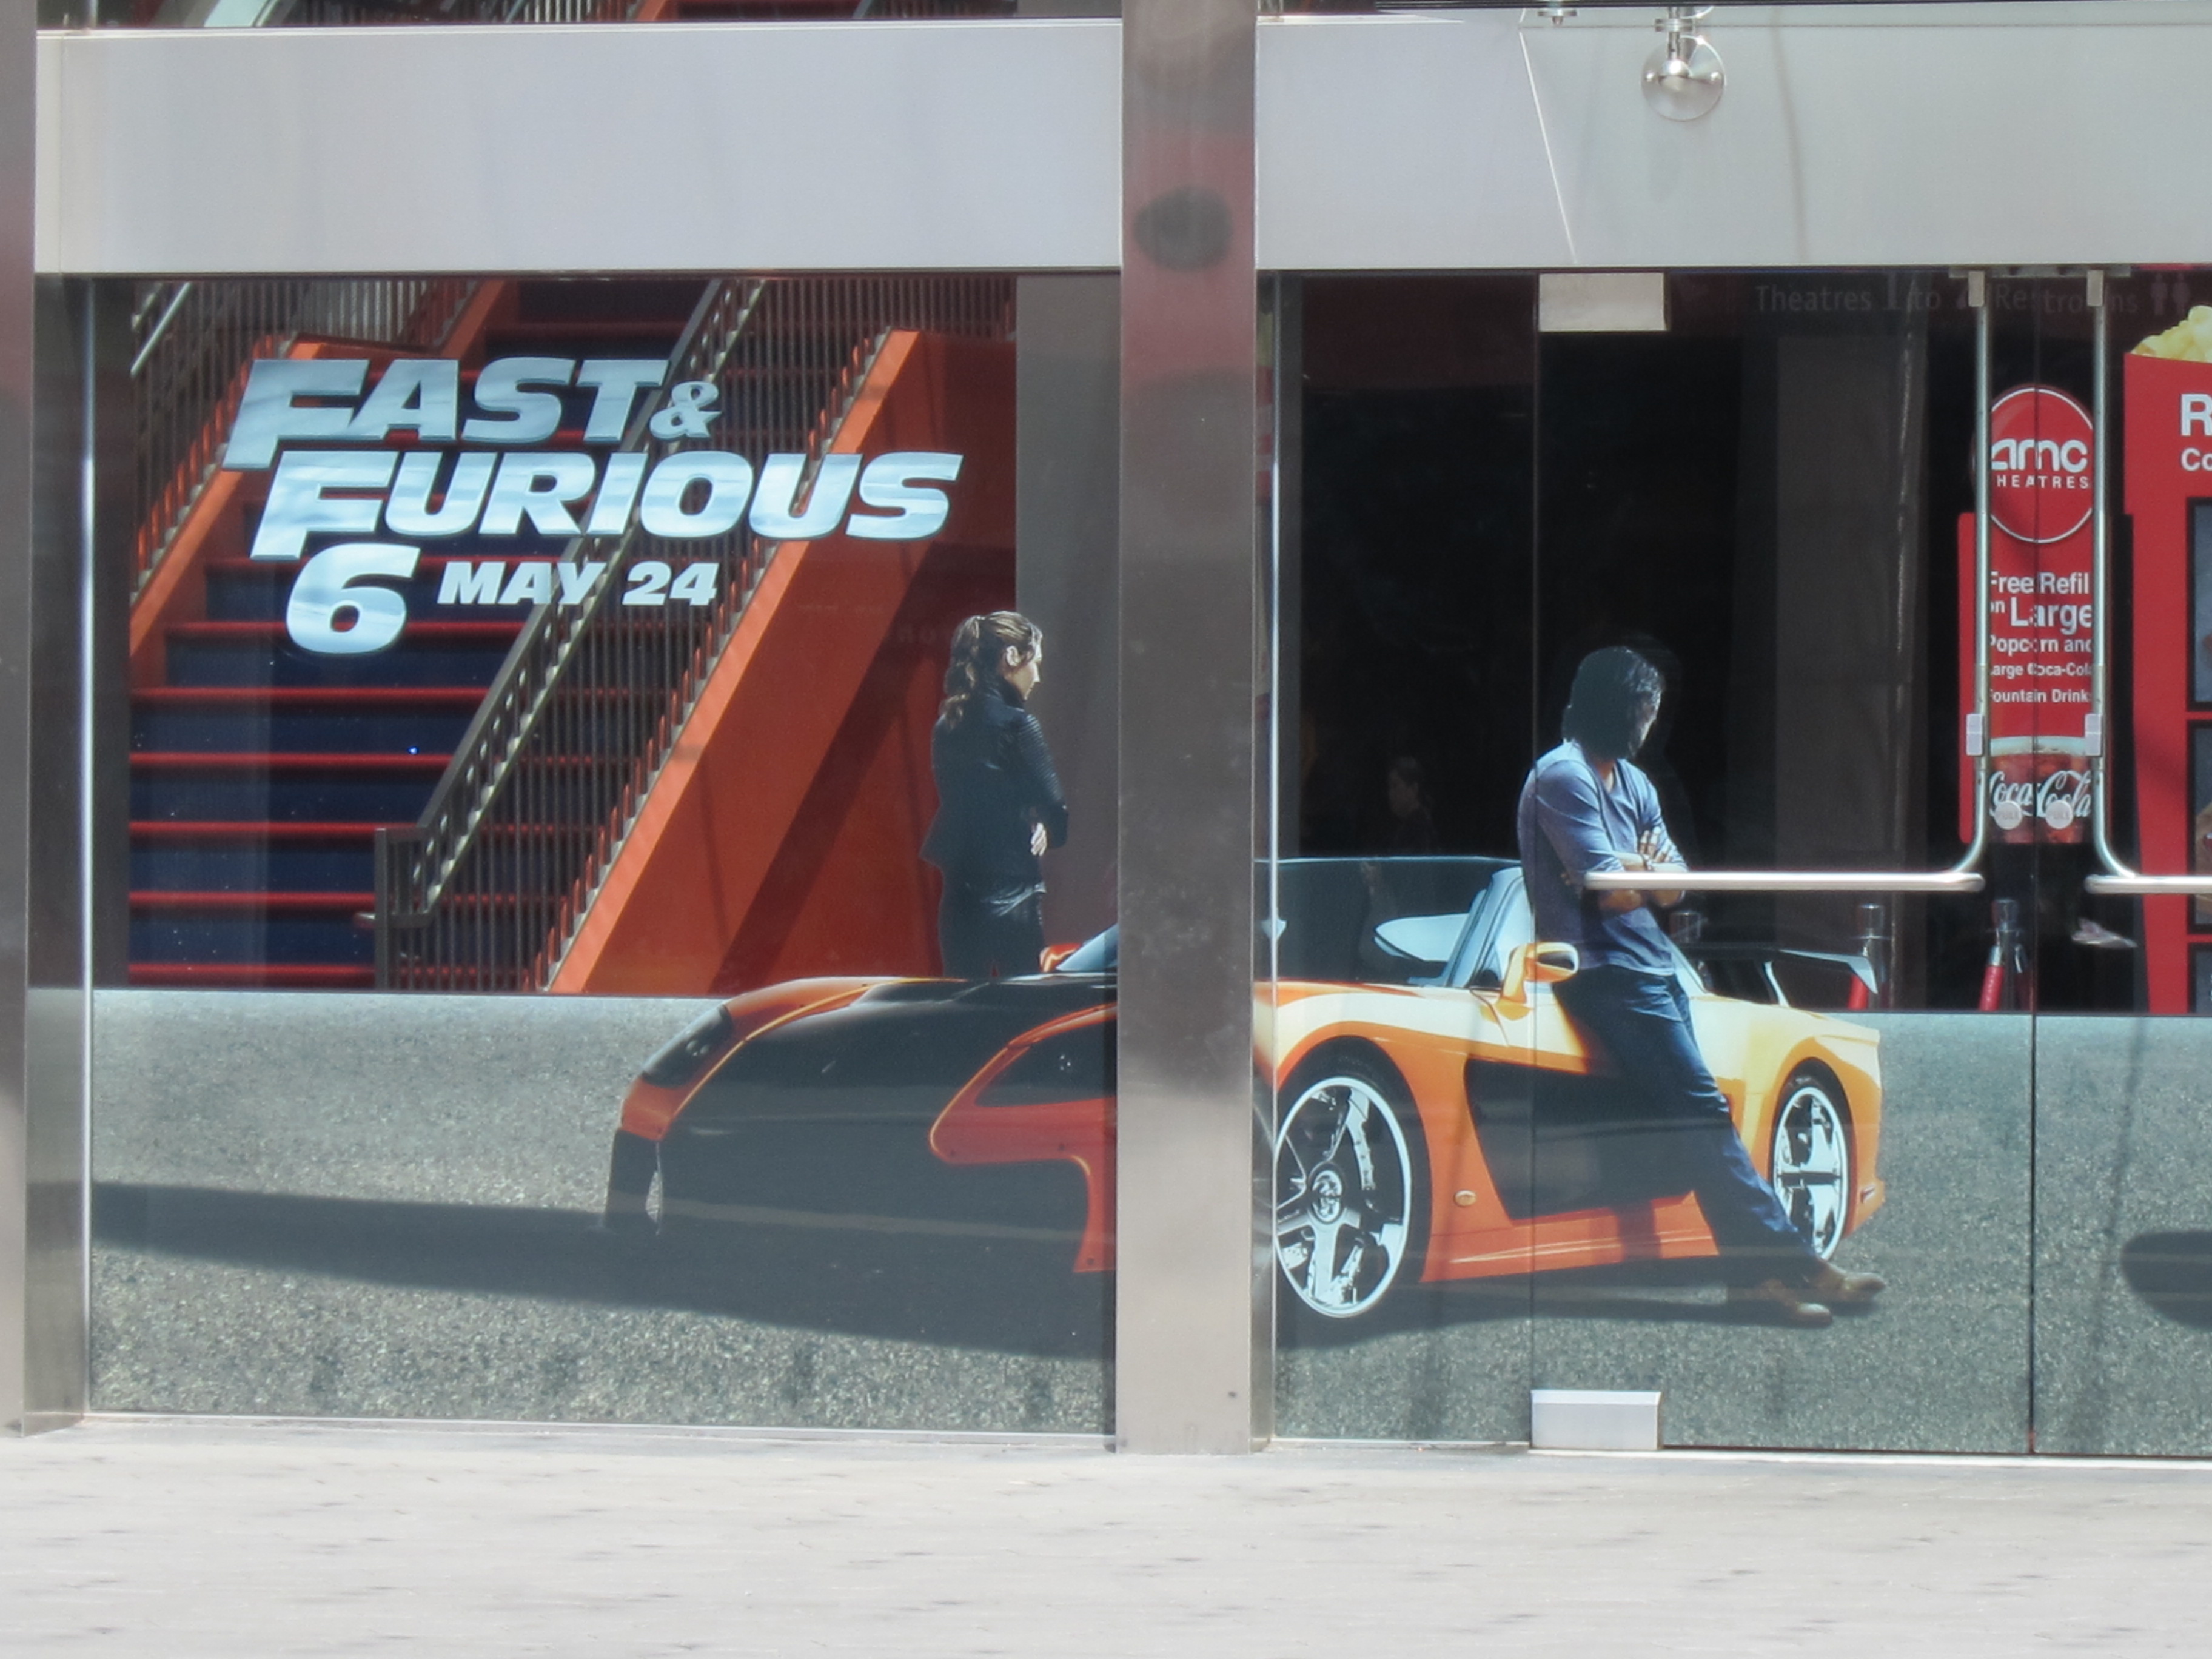 FAST AND FURIOUS 6 lifelike front window graphics at the AMC Universal CityWalk Cinemas in Southern California.